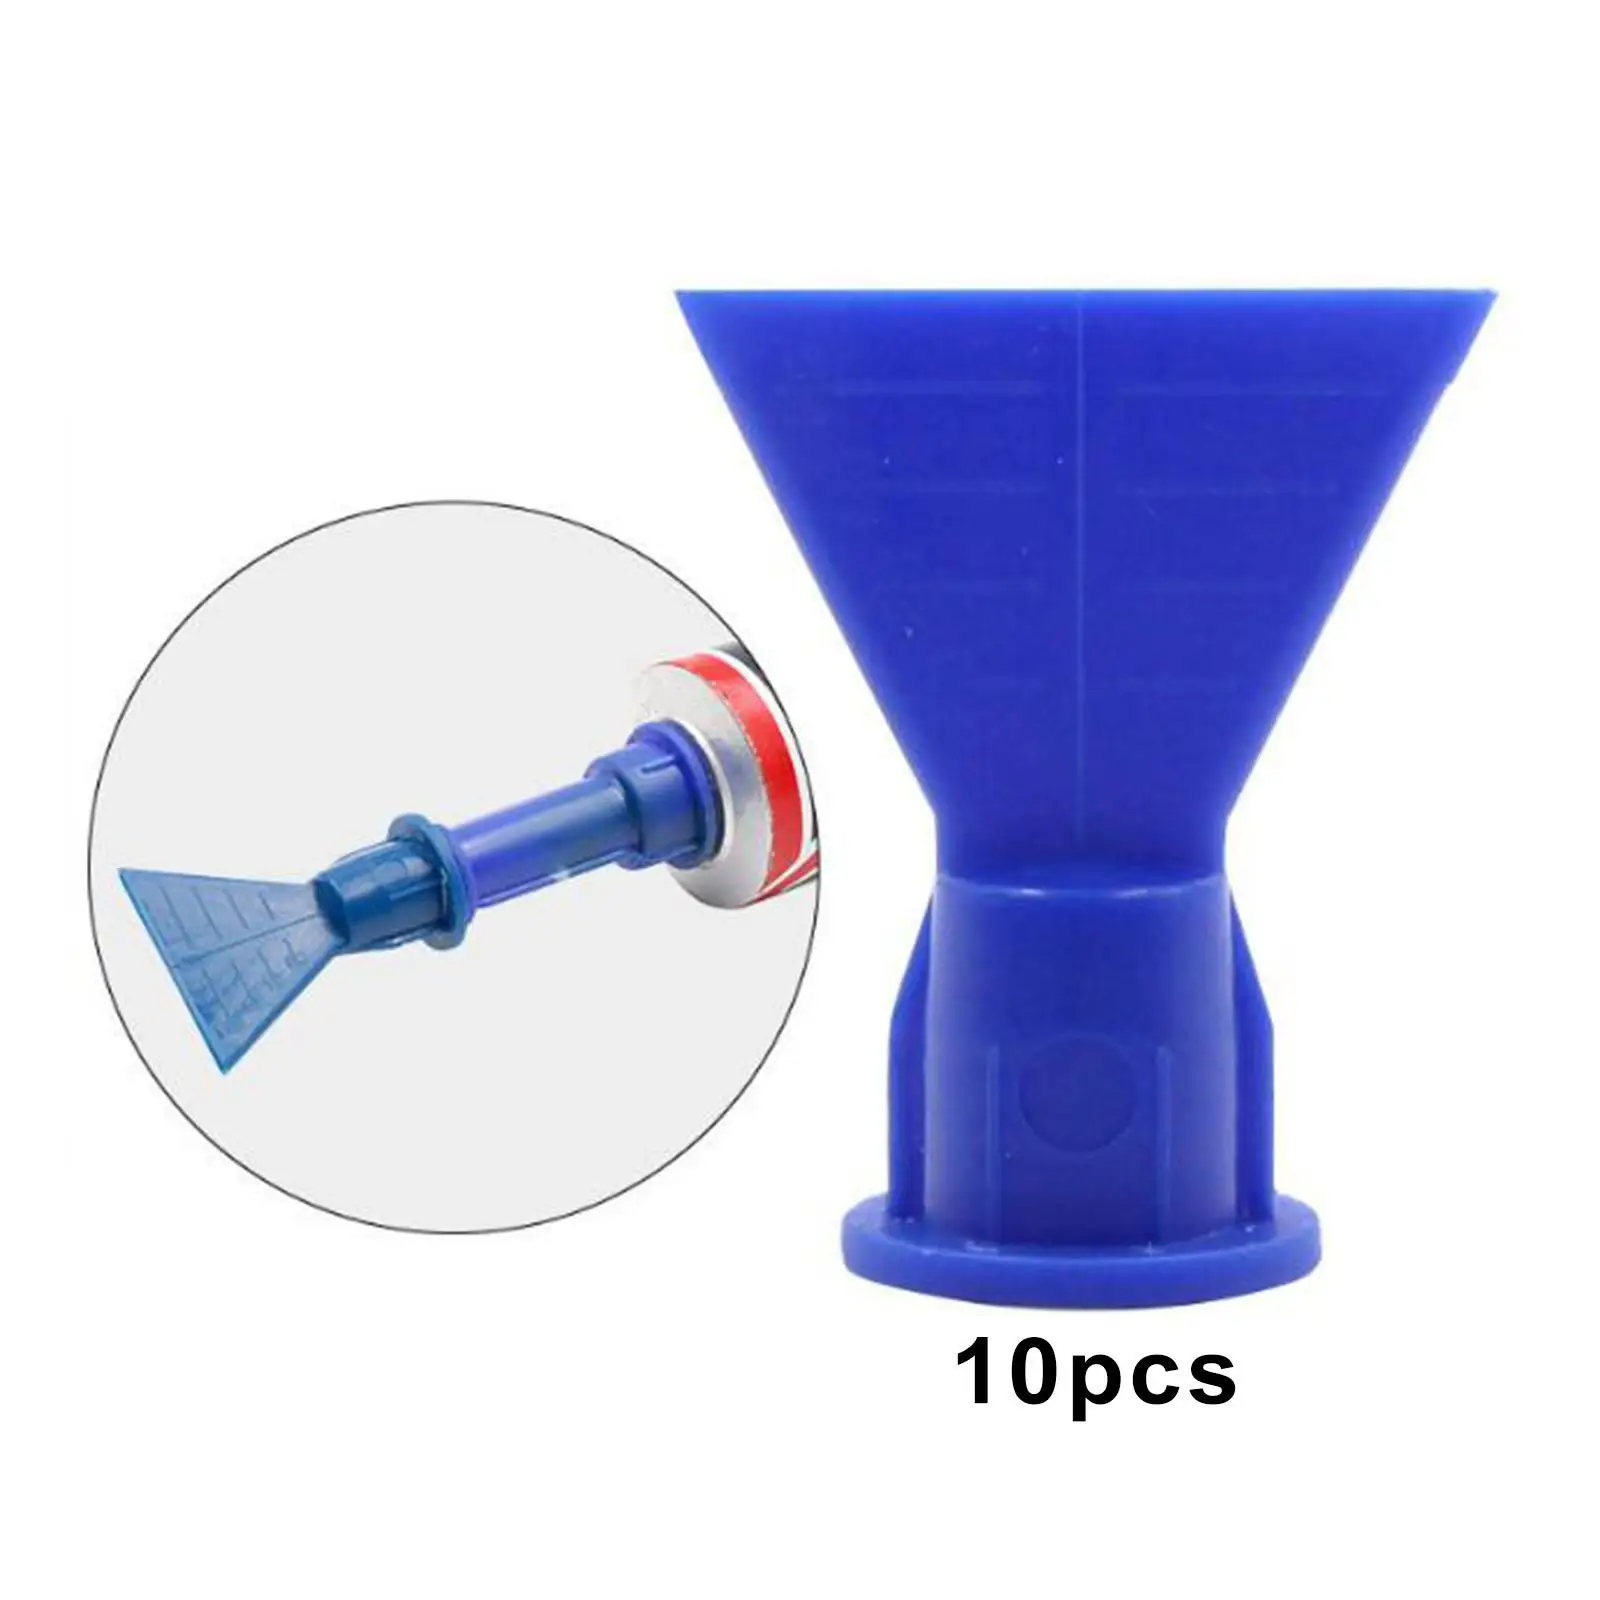 10x Wave Shape Cone Nozzle Spray Tip Plastic Glue Durable Replacement Accessory Tool Blue for Cartridge Caulking Gun Syringe